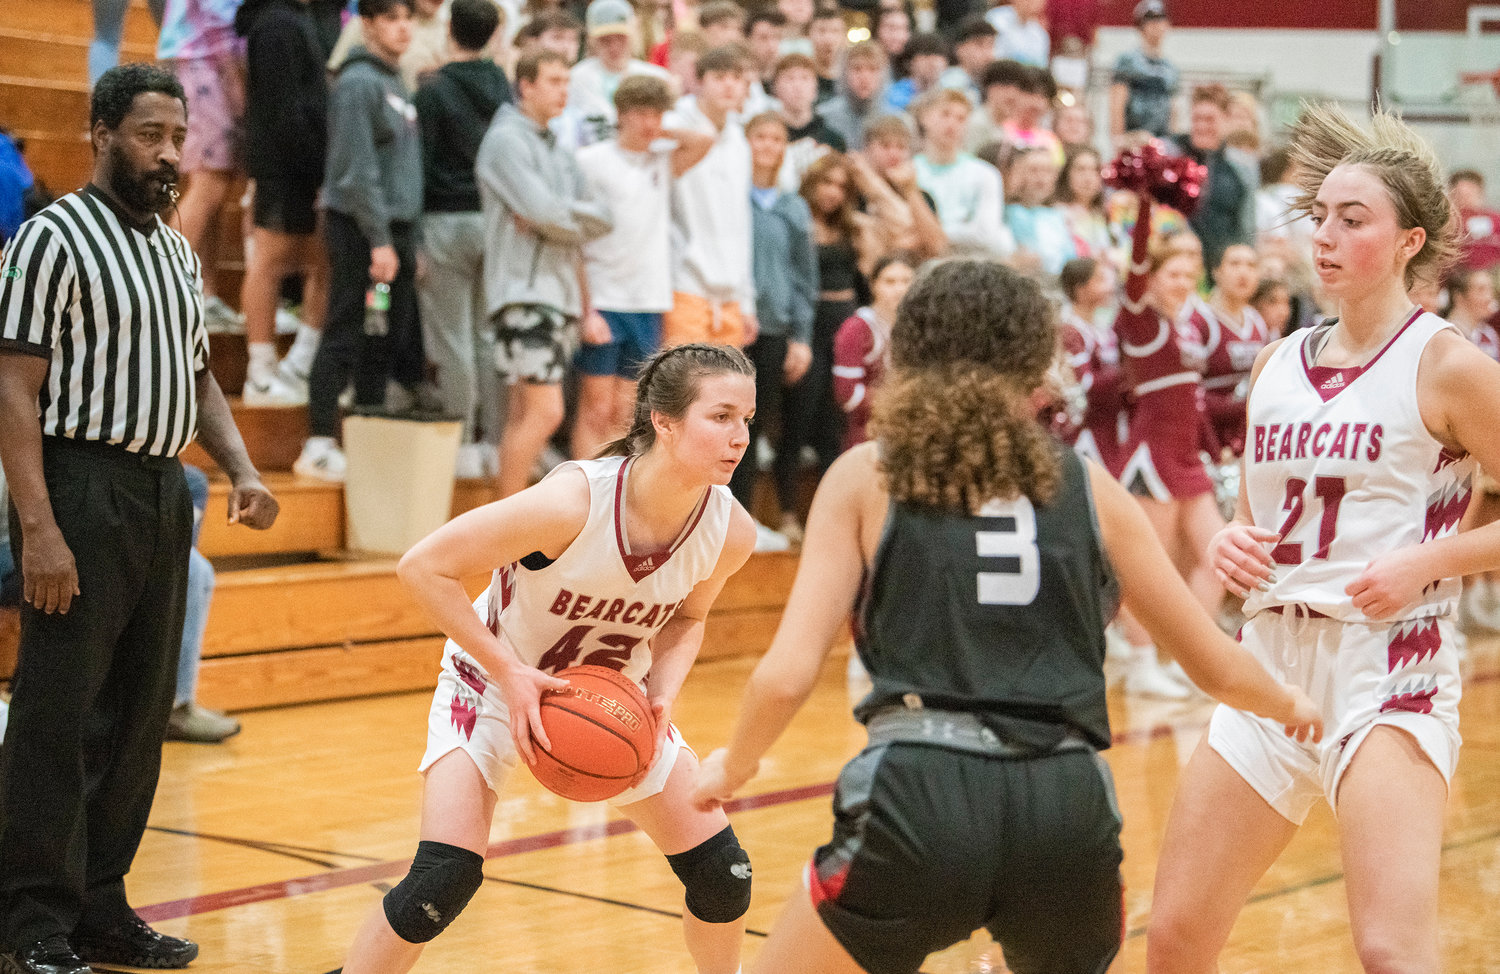 Bearcat sophomore Amanda Bennett (42) looks to dribble during a game against R.A. Long Tuesday night in Chehalis.